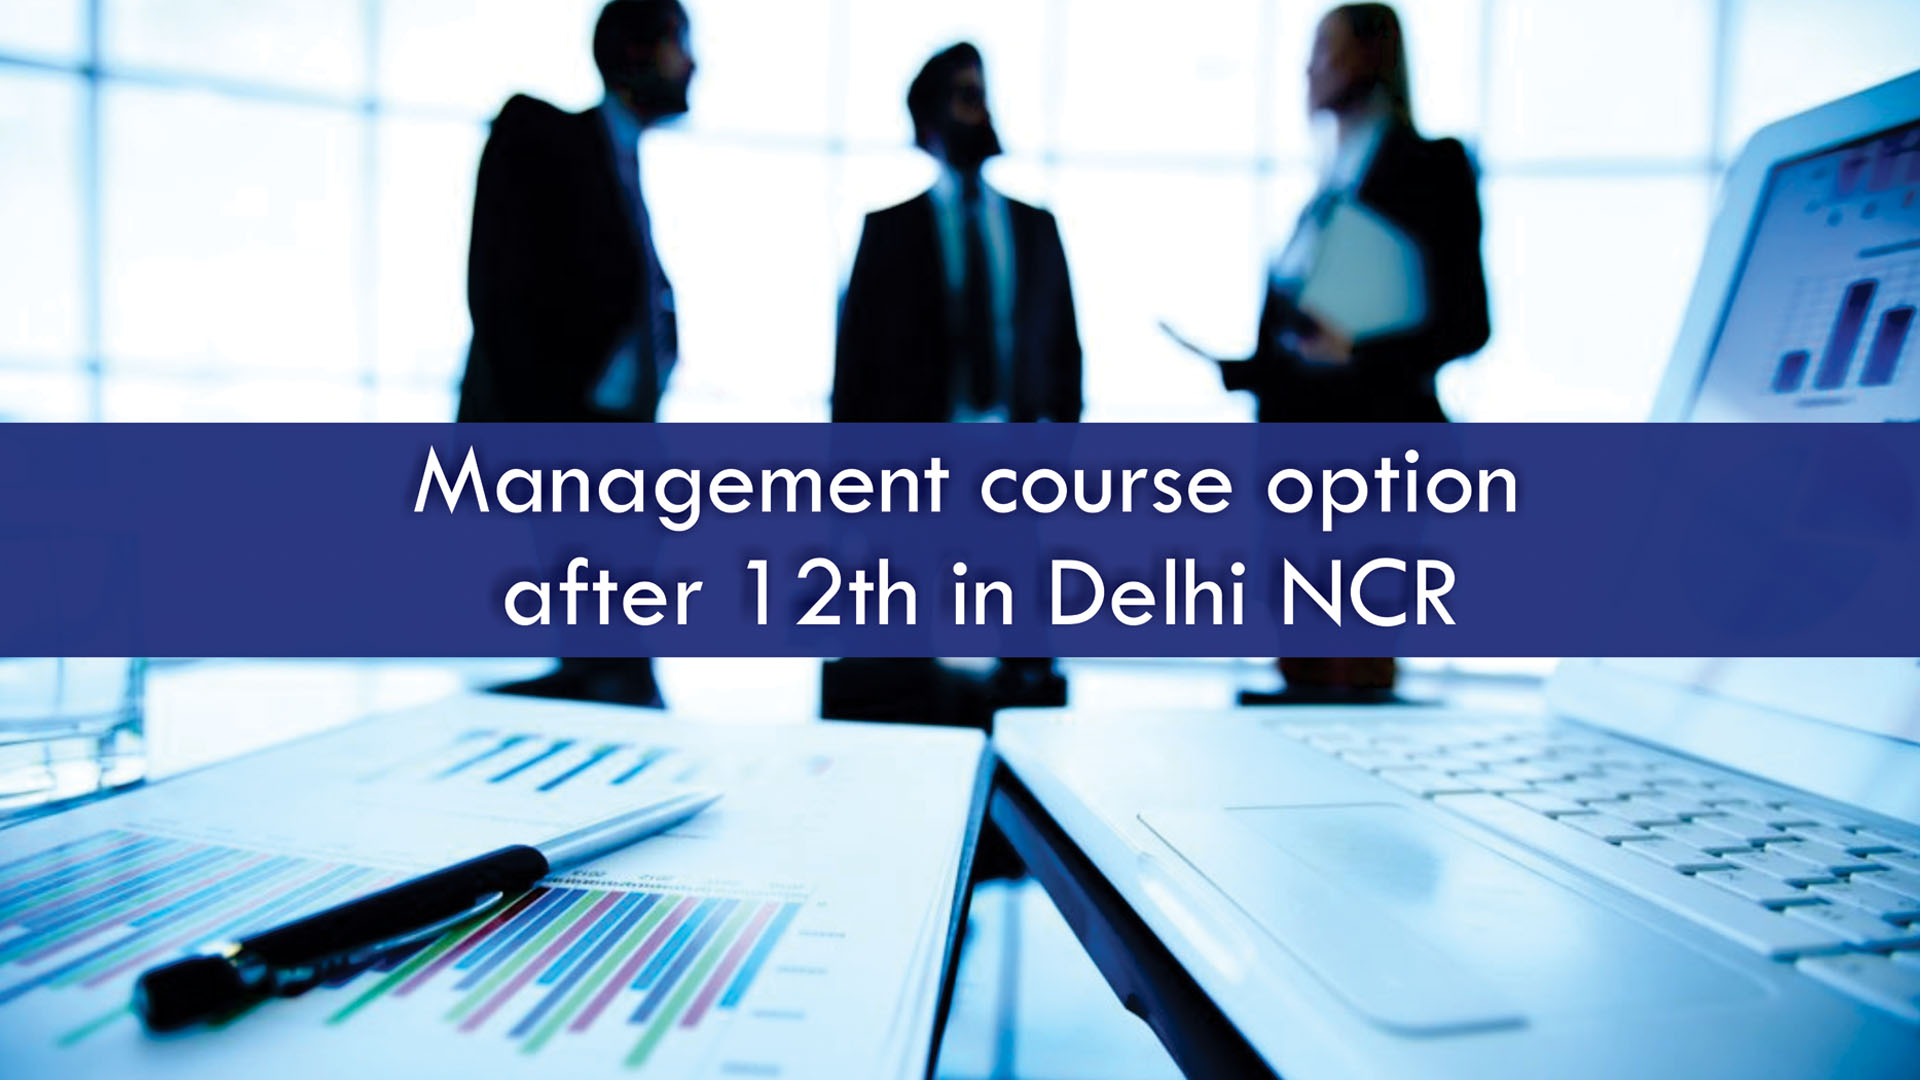 Management course option after 12th in
                        Delhi NCR